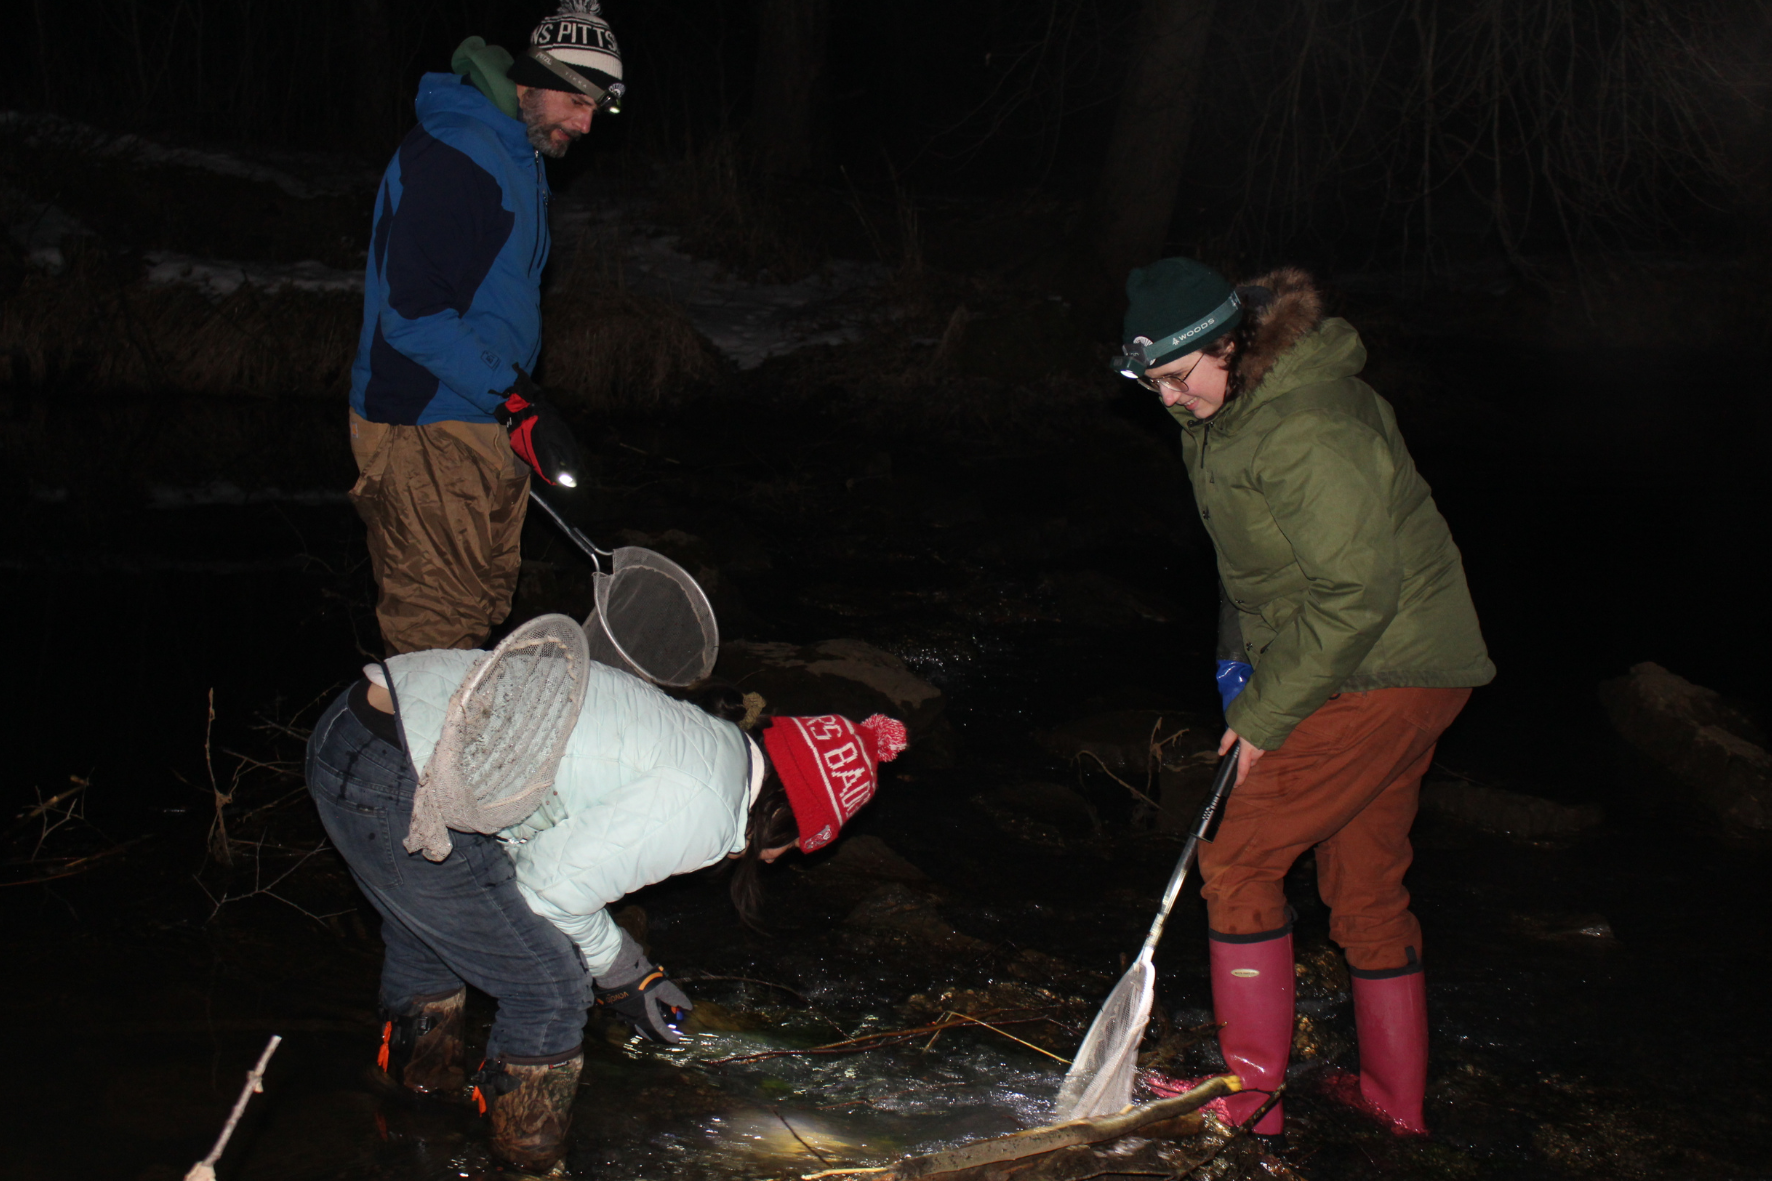 DNR biologists search for mudpuppies in Wisconsin in the Lower Wisconsin State Riverway, as part of an effort to learn more about their distribution across the state.